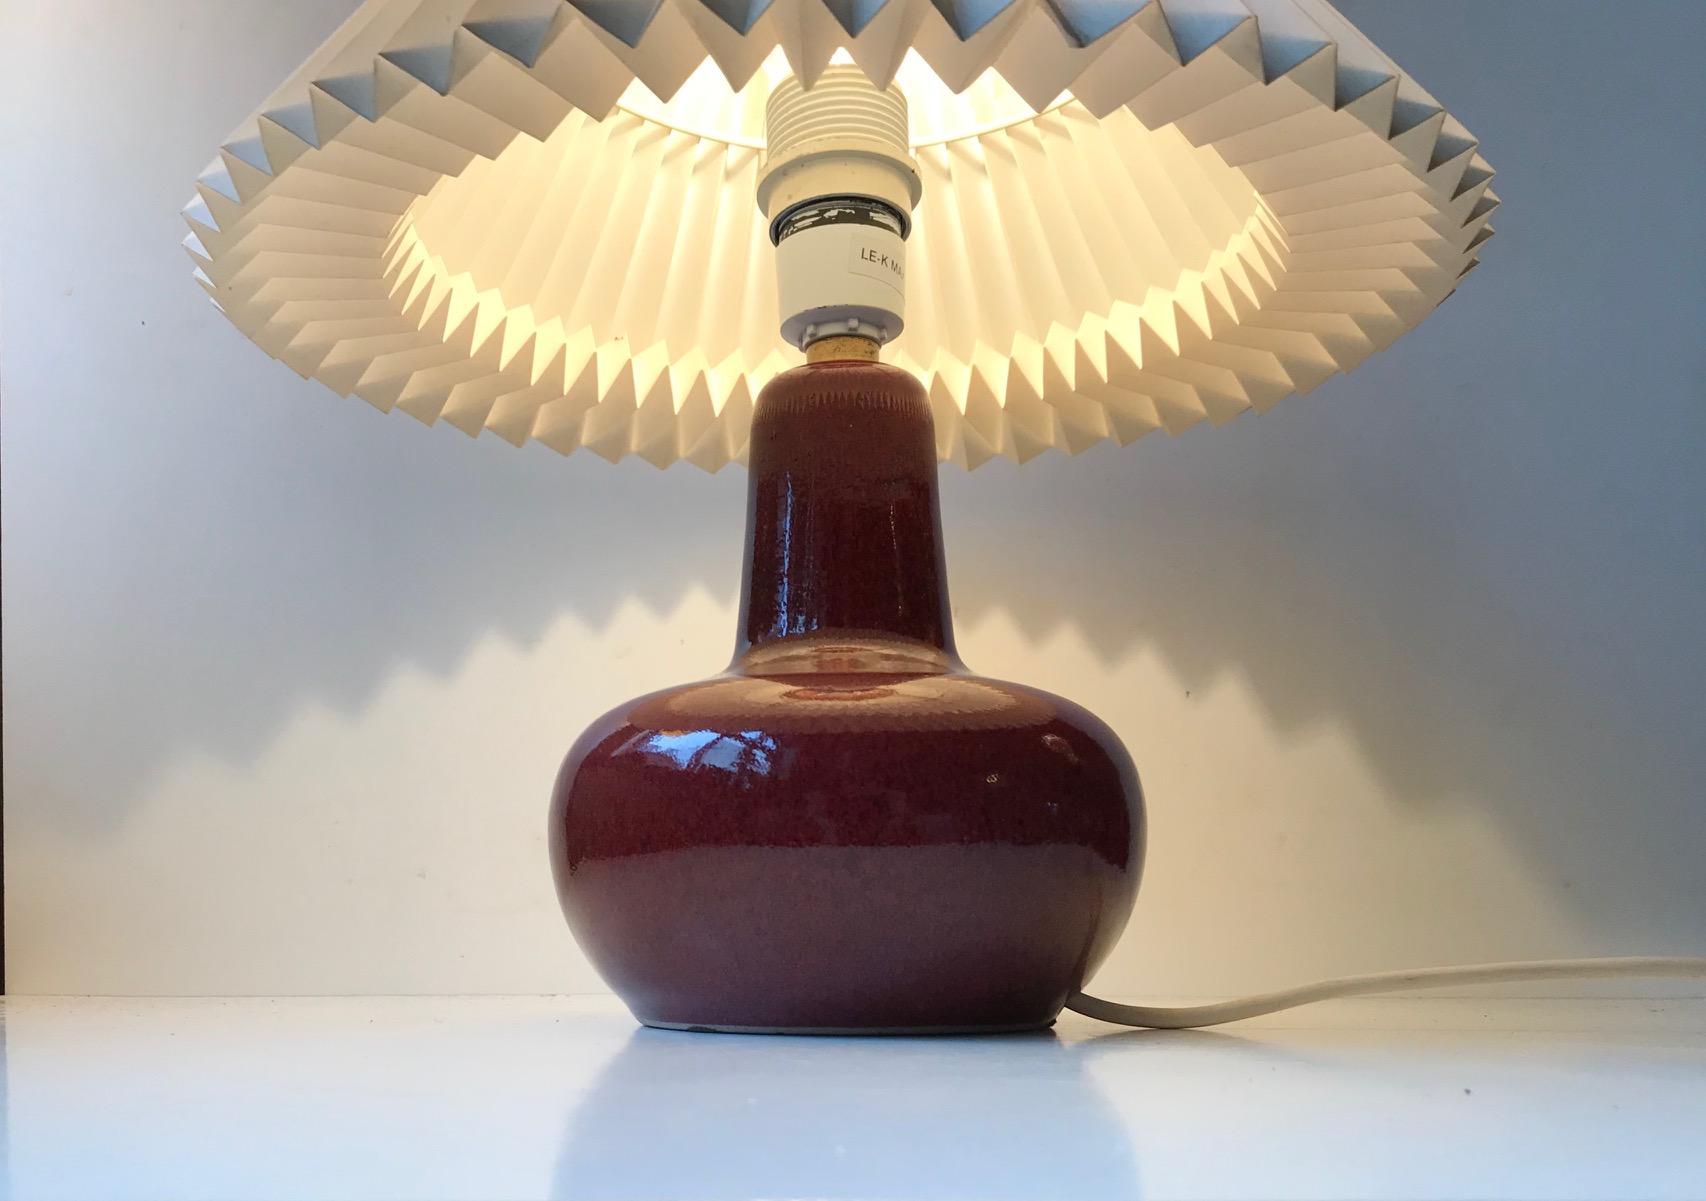 Vintage Danish Le Klint ceramic table lamp with deep and rich oxblood glaze. It was designed by Ole Bøgild in the 1970s. Stamped with both maker marks and designer attribution to the base. The table lamp is in excellent condition, without any